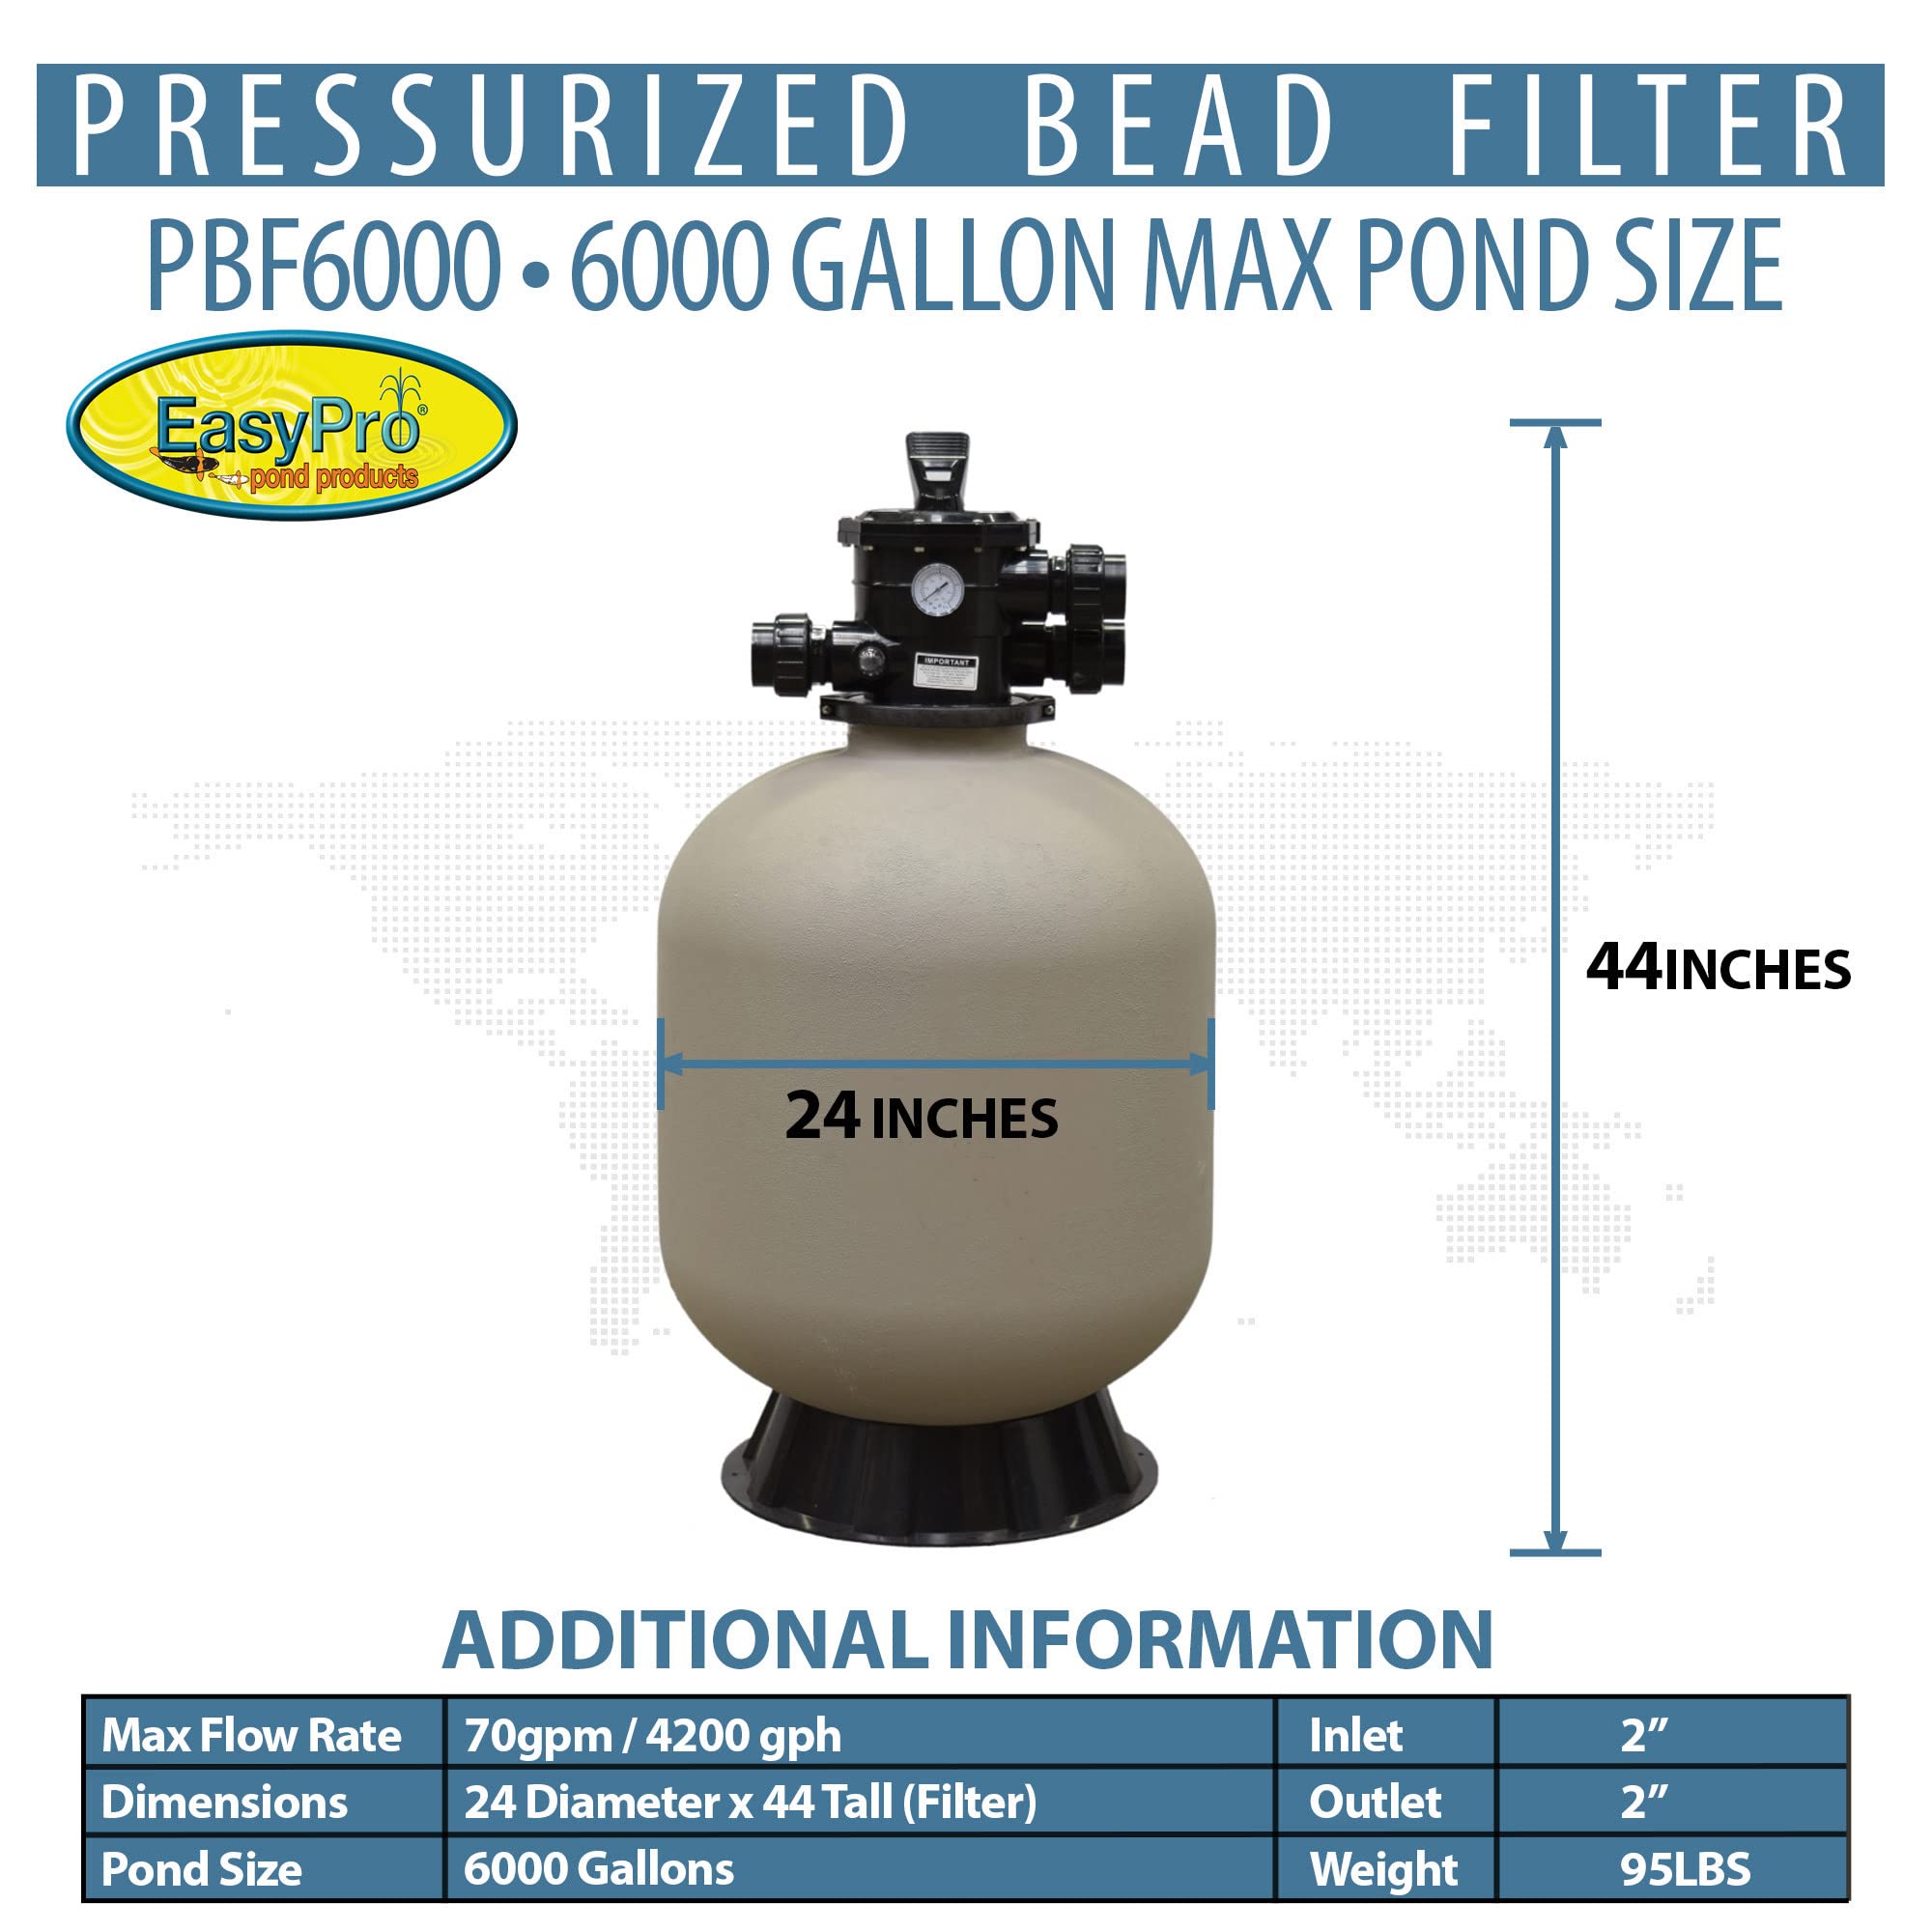 EasyPro PBF6000 Pressurized Bead Filter for Ponds & Fish Systems / 6000 Gallon Max. / Biological & Mechanical Media Provides Excellent Filtration/Easy Intallation & Cleaning